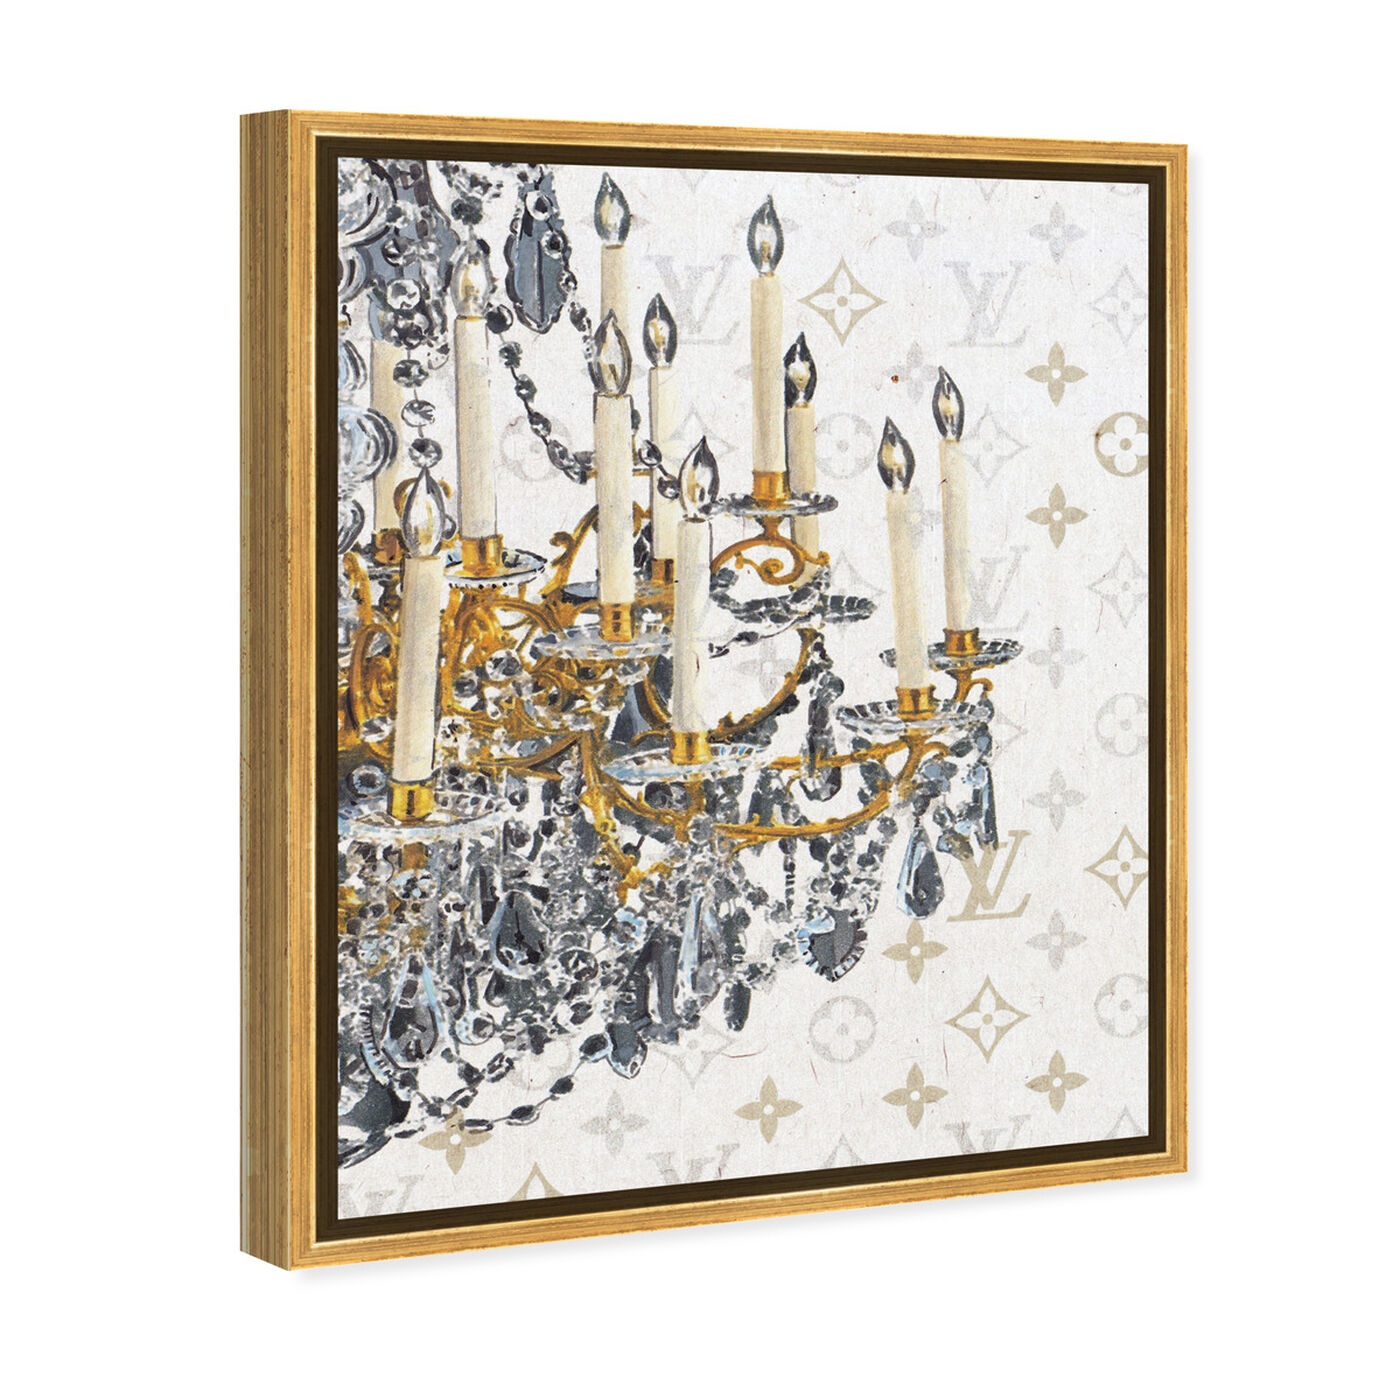 Angled view of Fancy Light II featuring fashion and glam and chandeliers art.